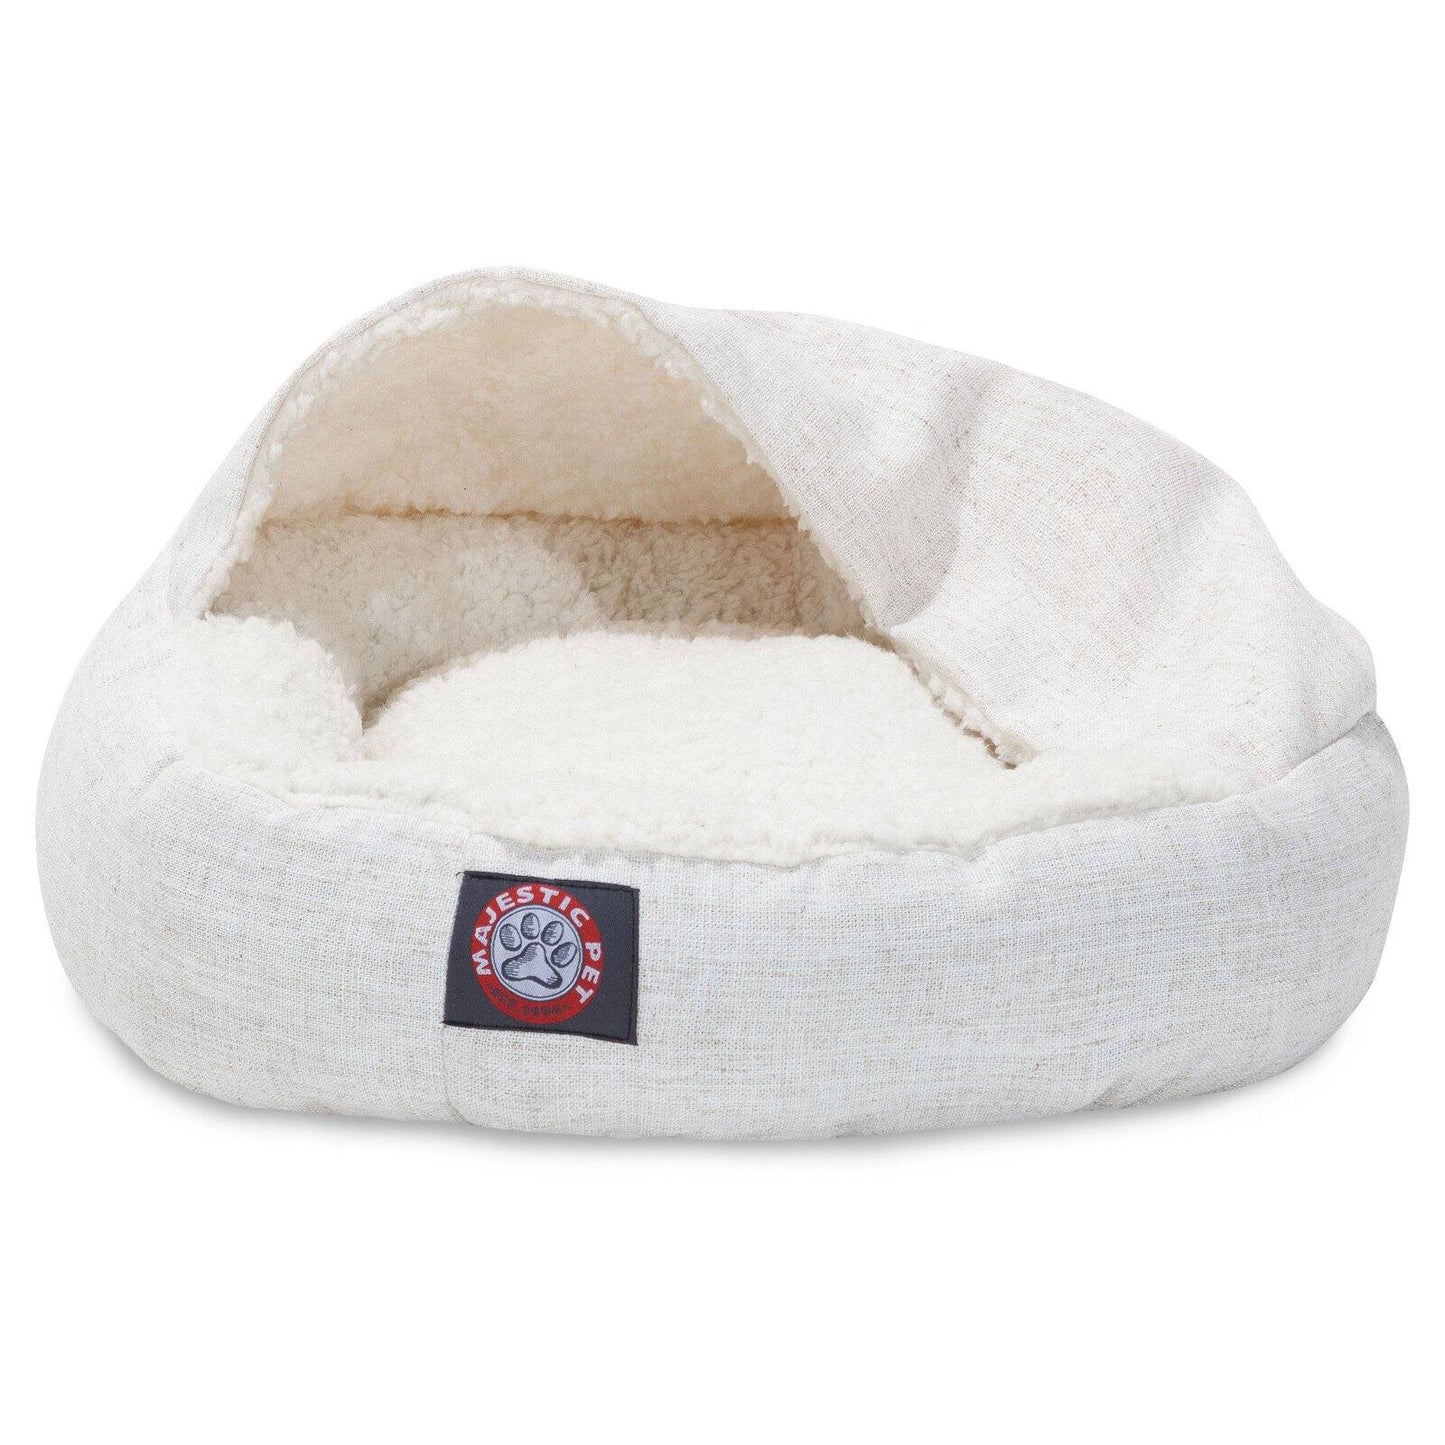 Majestic Pet Canopy Pet Cat Bed, off White